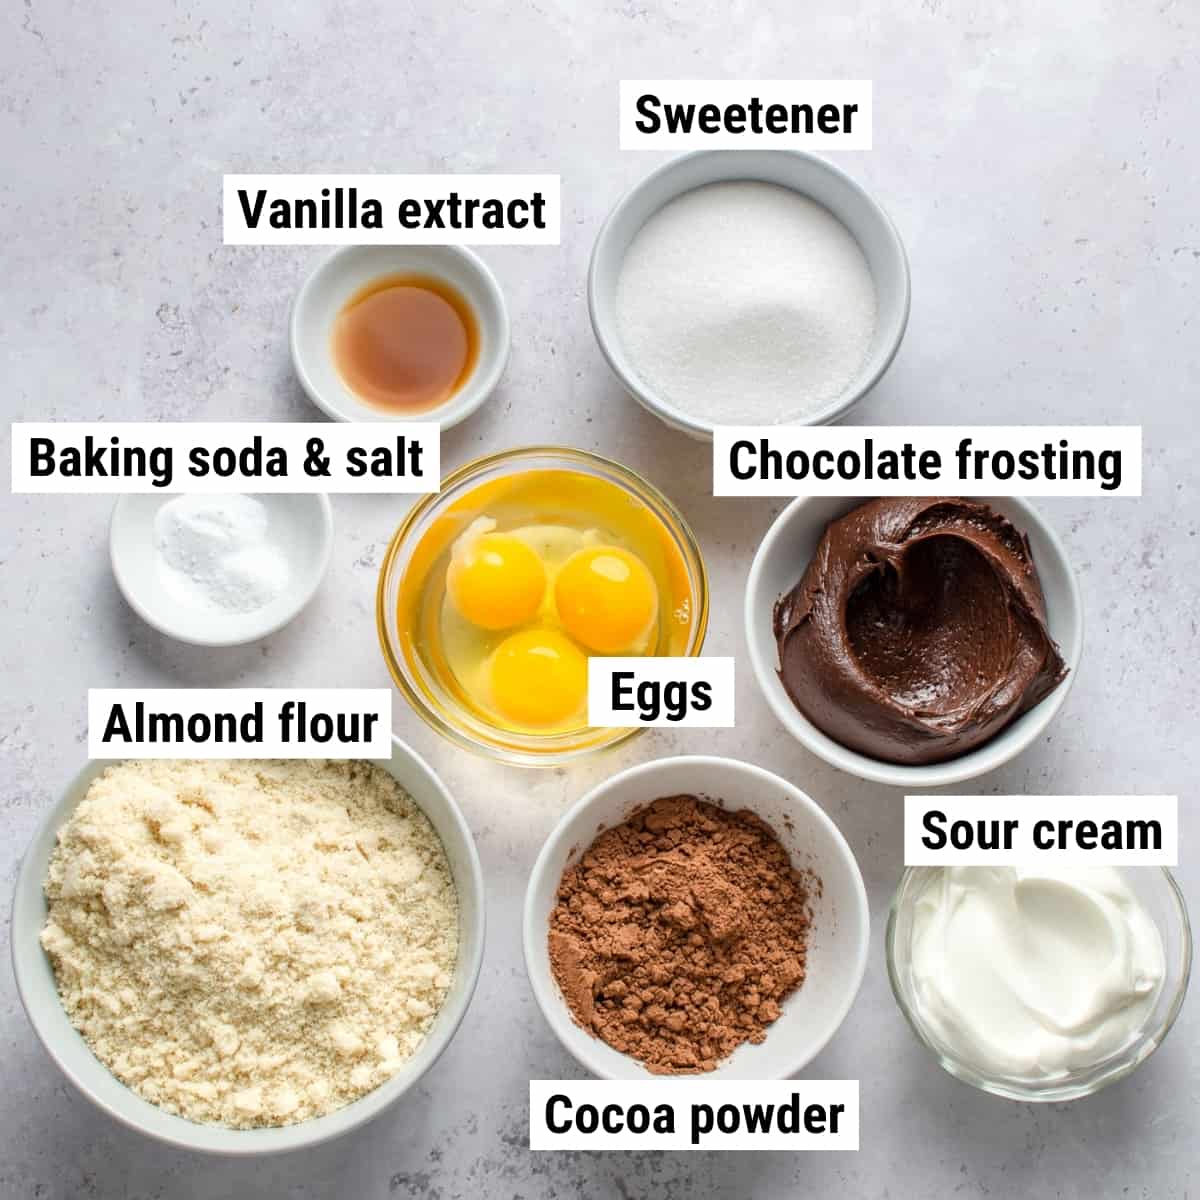 The ingredients used to make almond flour cupcakes.